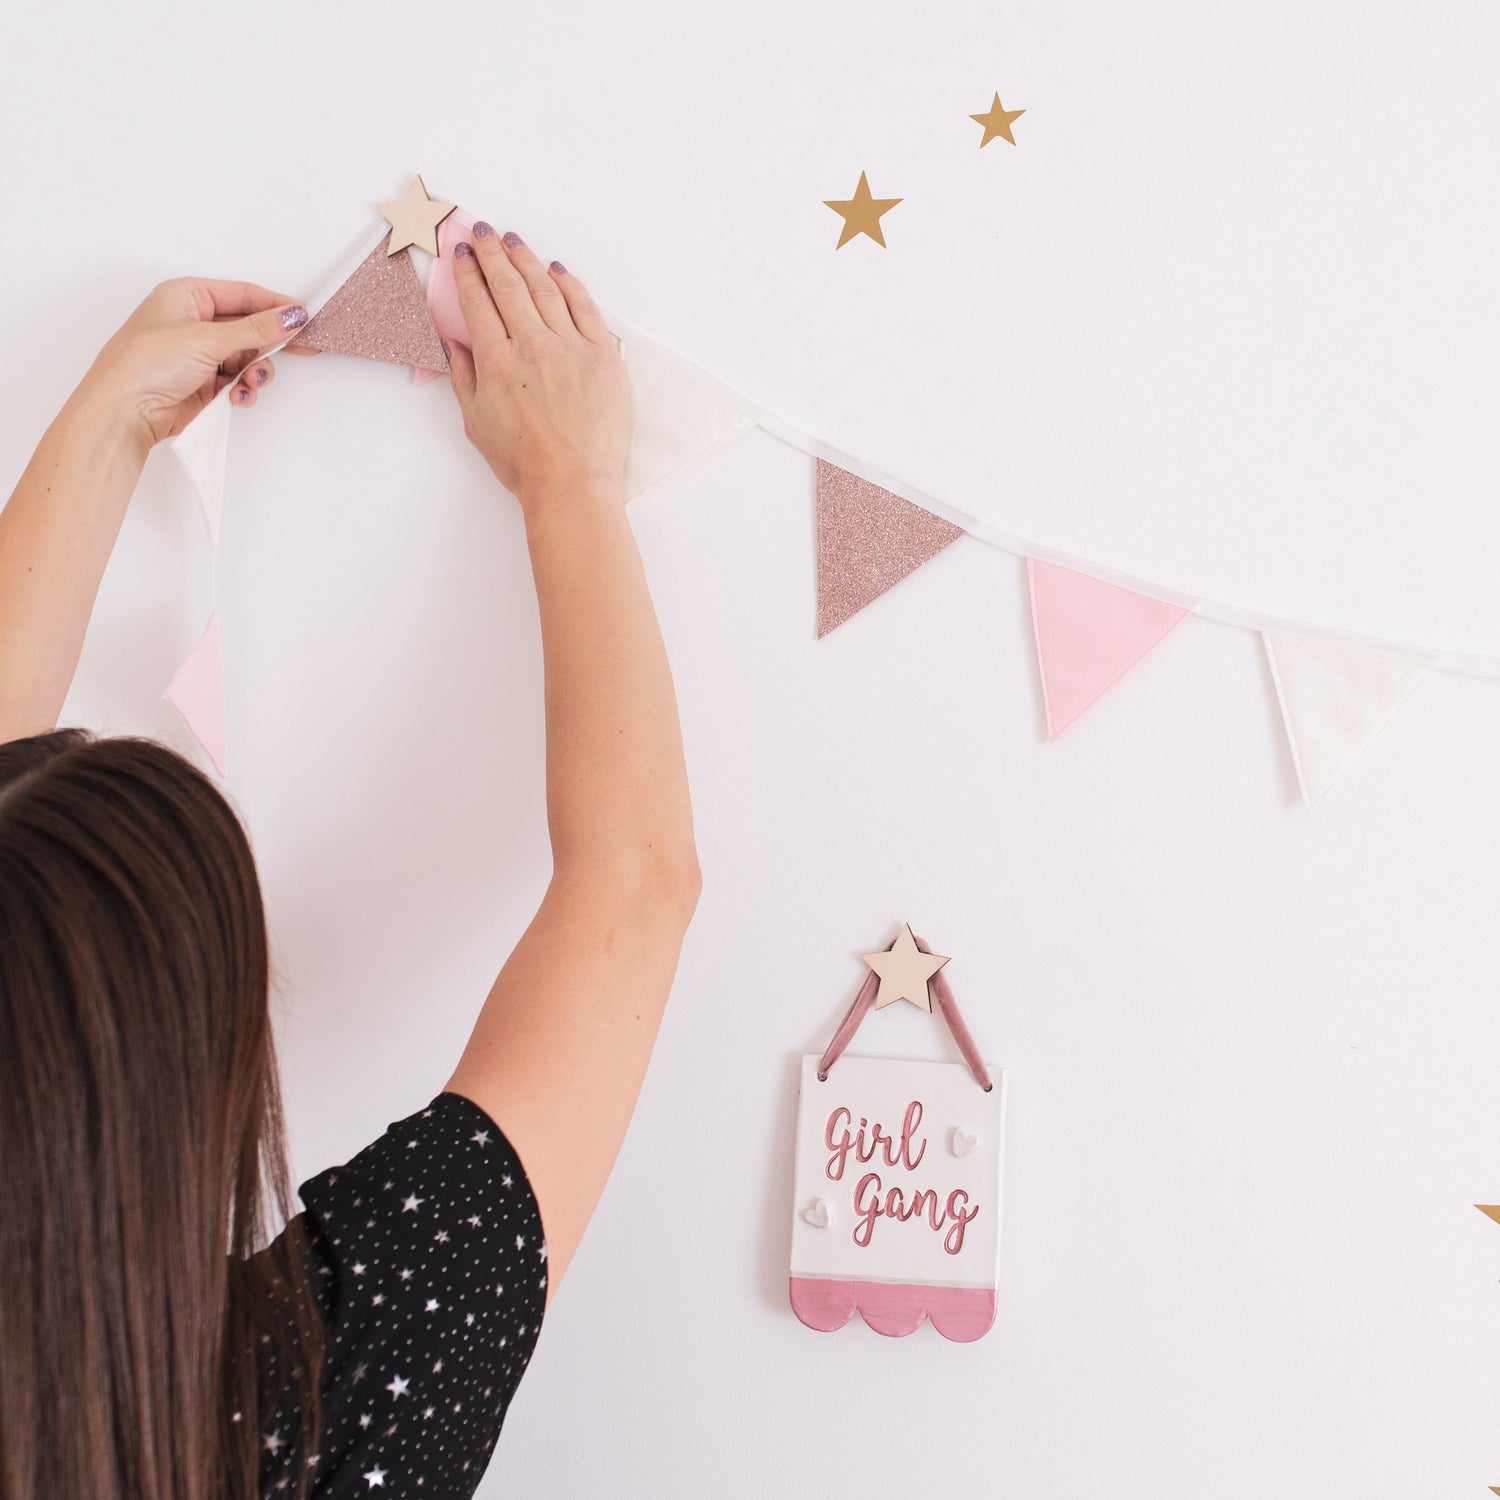 Adhesive hooks to hang bunting in a child's room